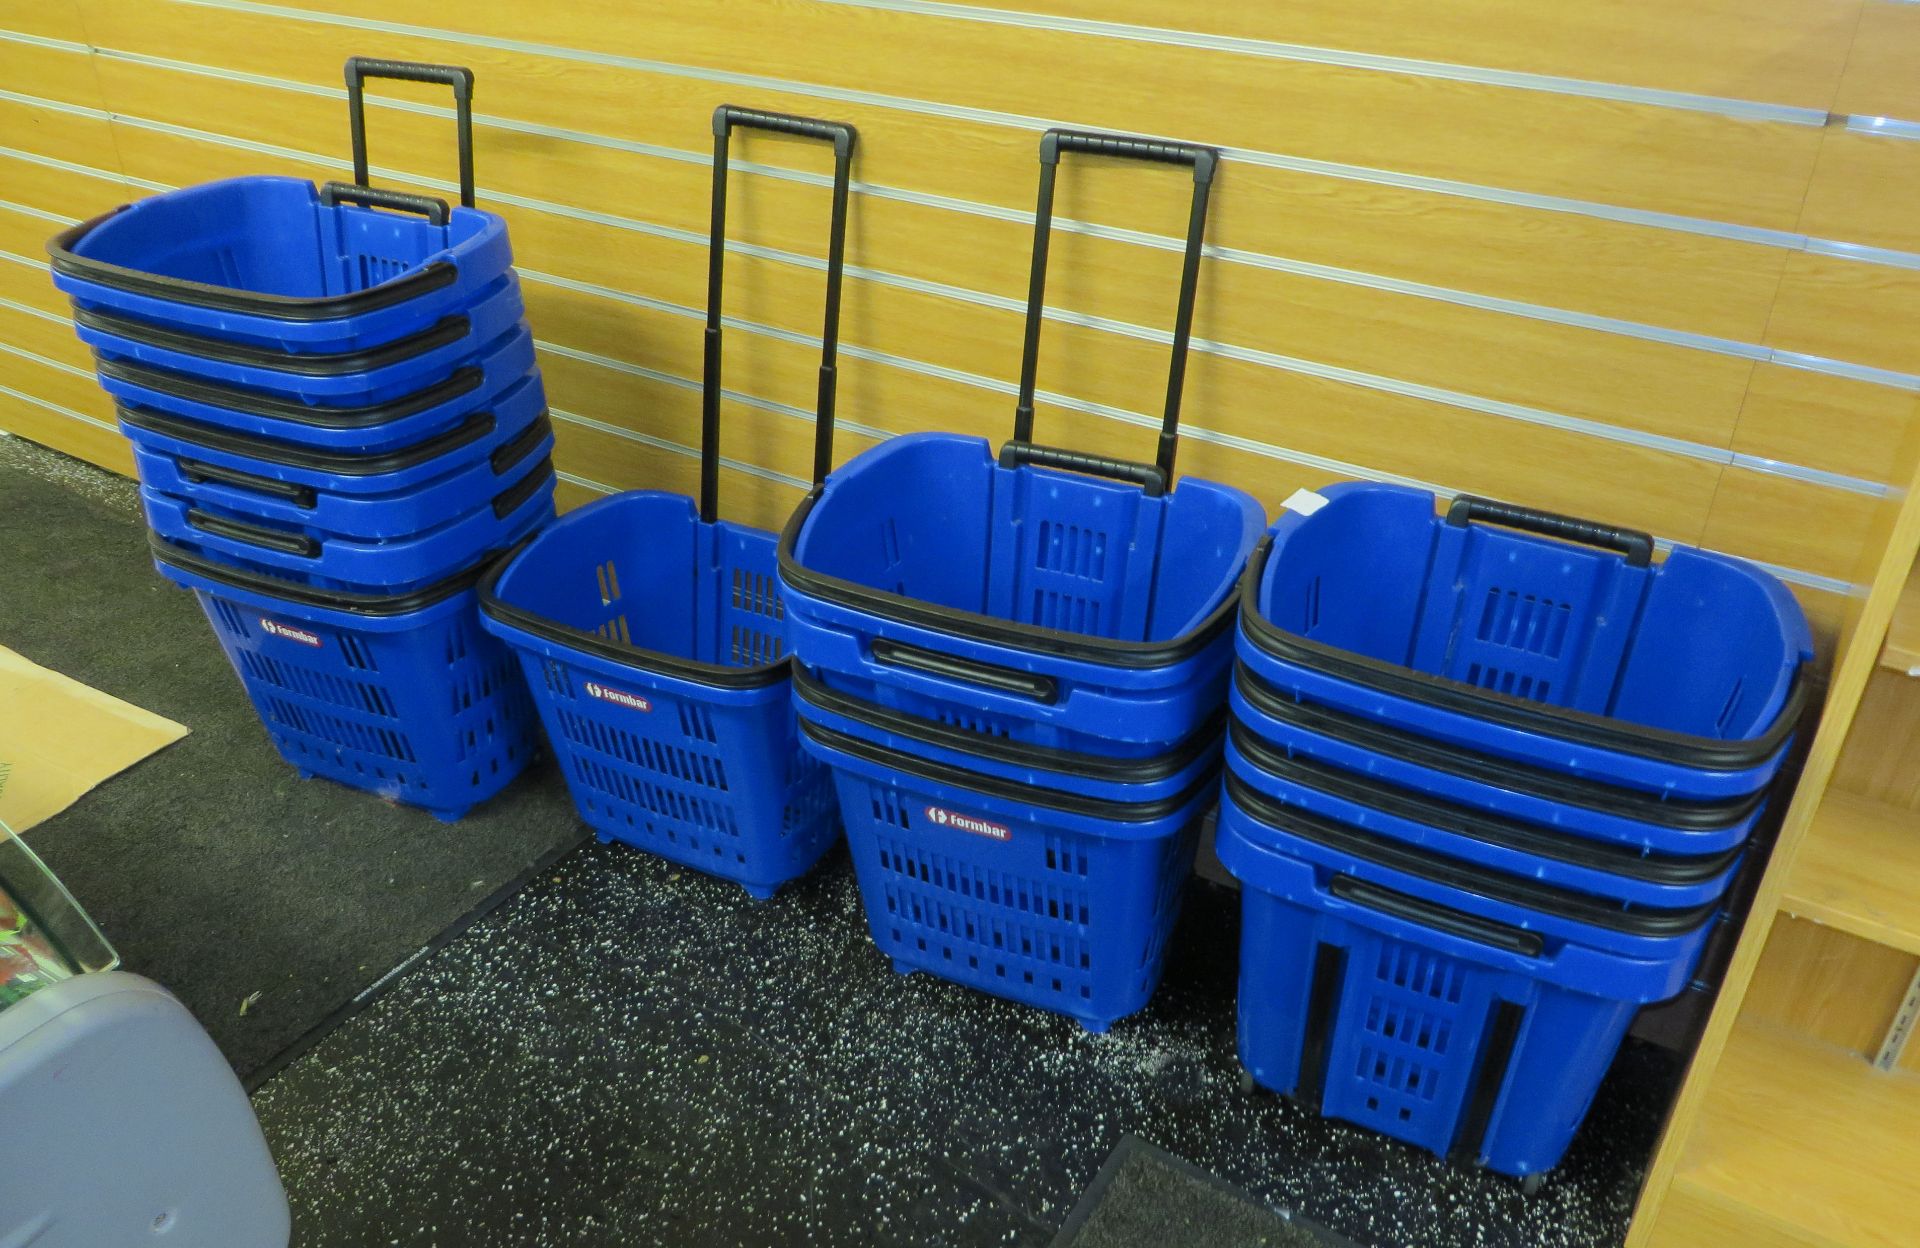 17 x Blue Wheeled Shopping Baskets with Extendable Handles - Ref: 023 - CL173 - Location: Altrincham - Image 2 of 4